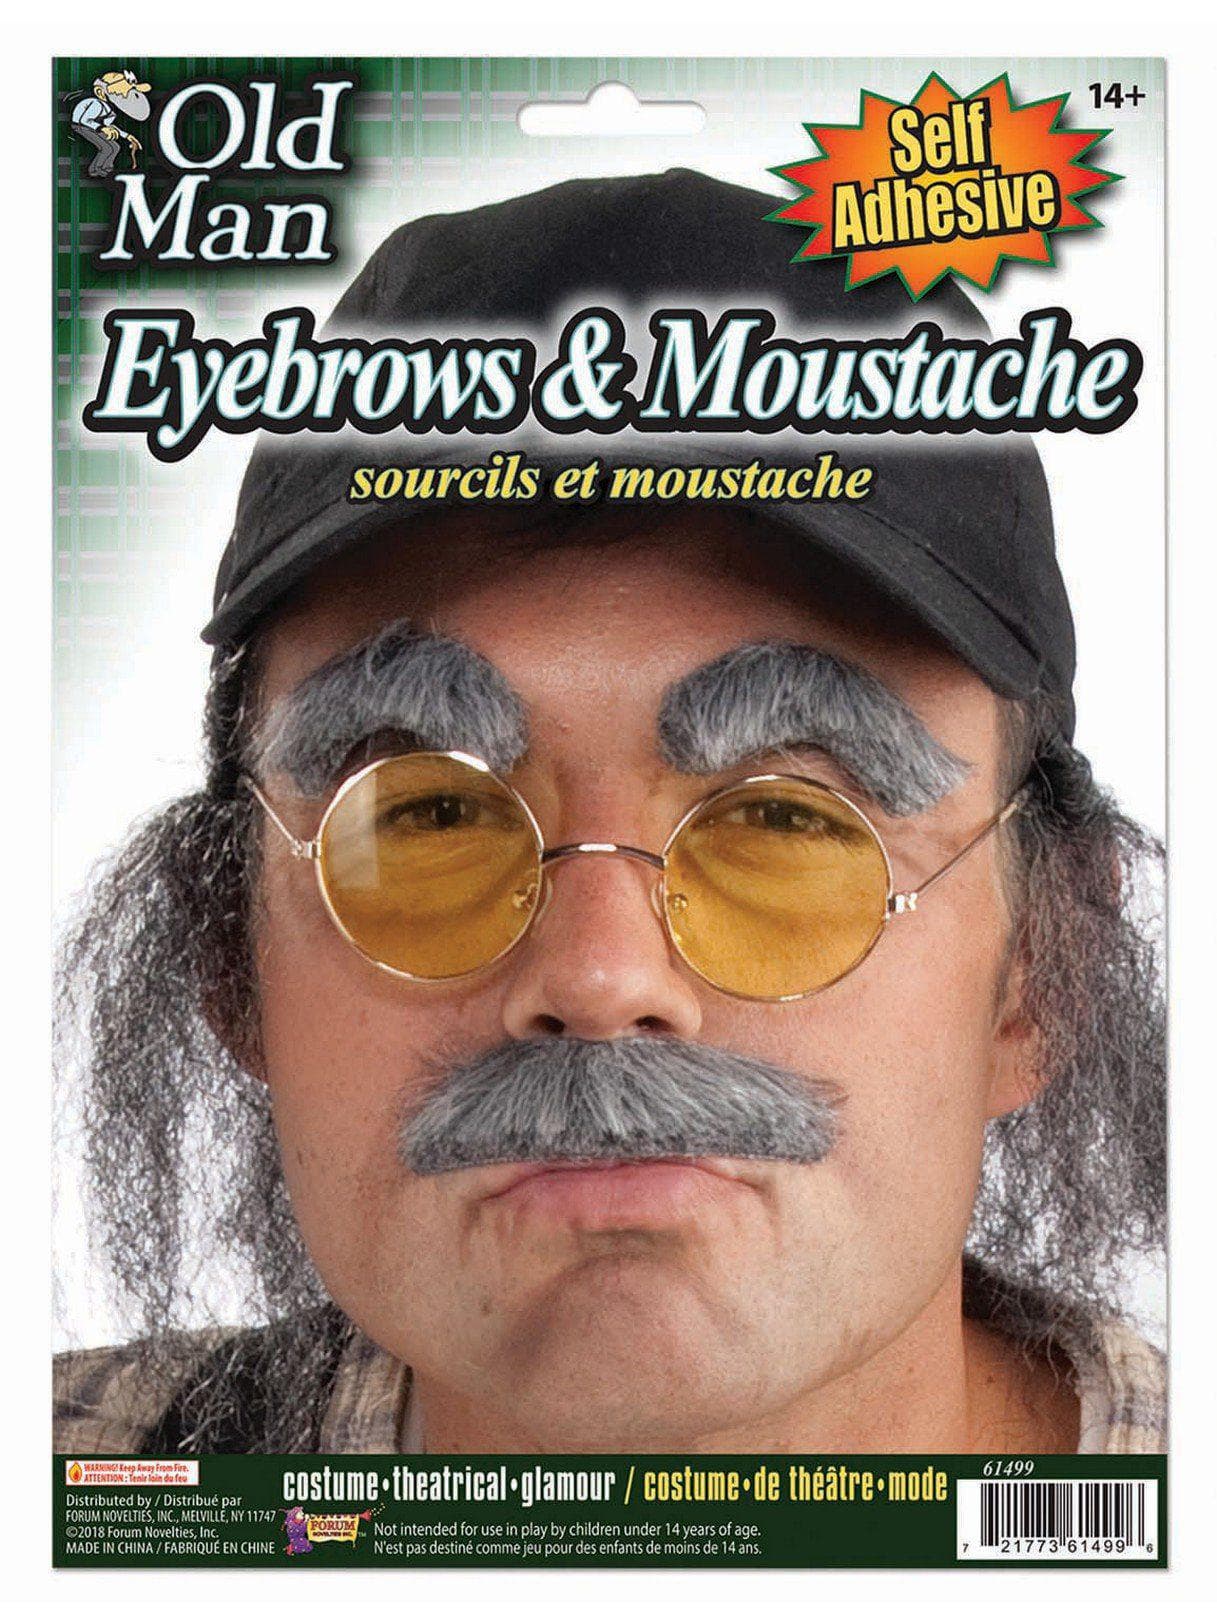 Adult Gray Old Man Self Adhesive Mustache and Eyebrows - costumes.com